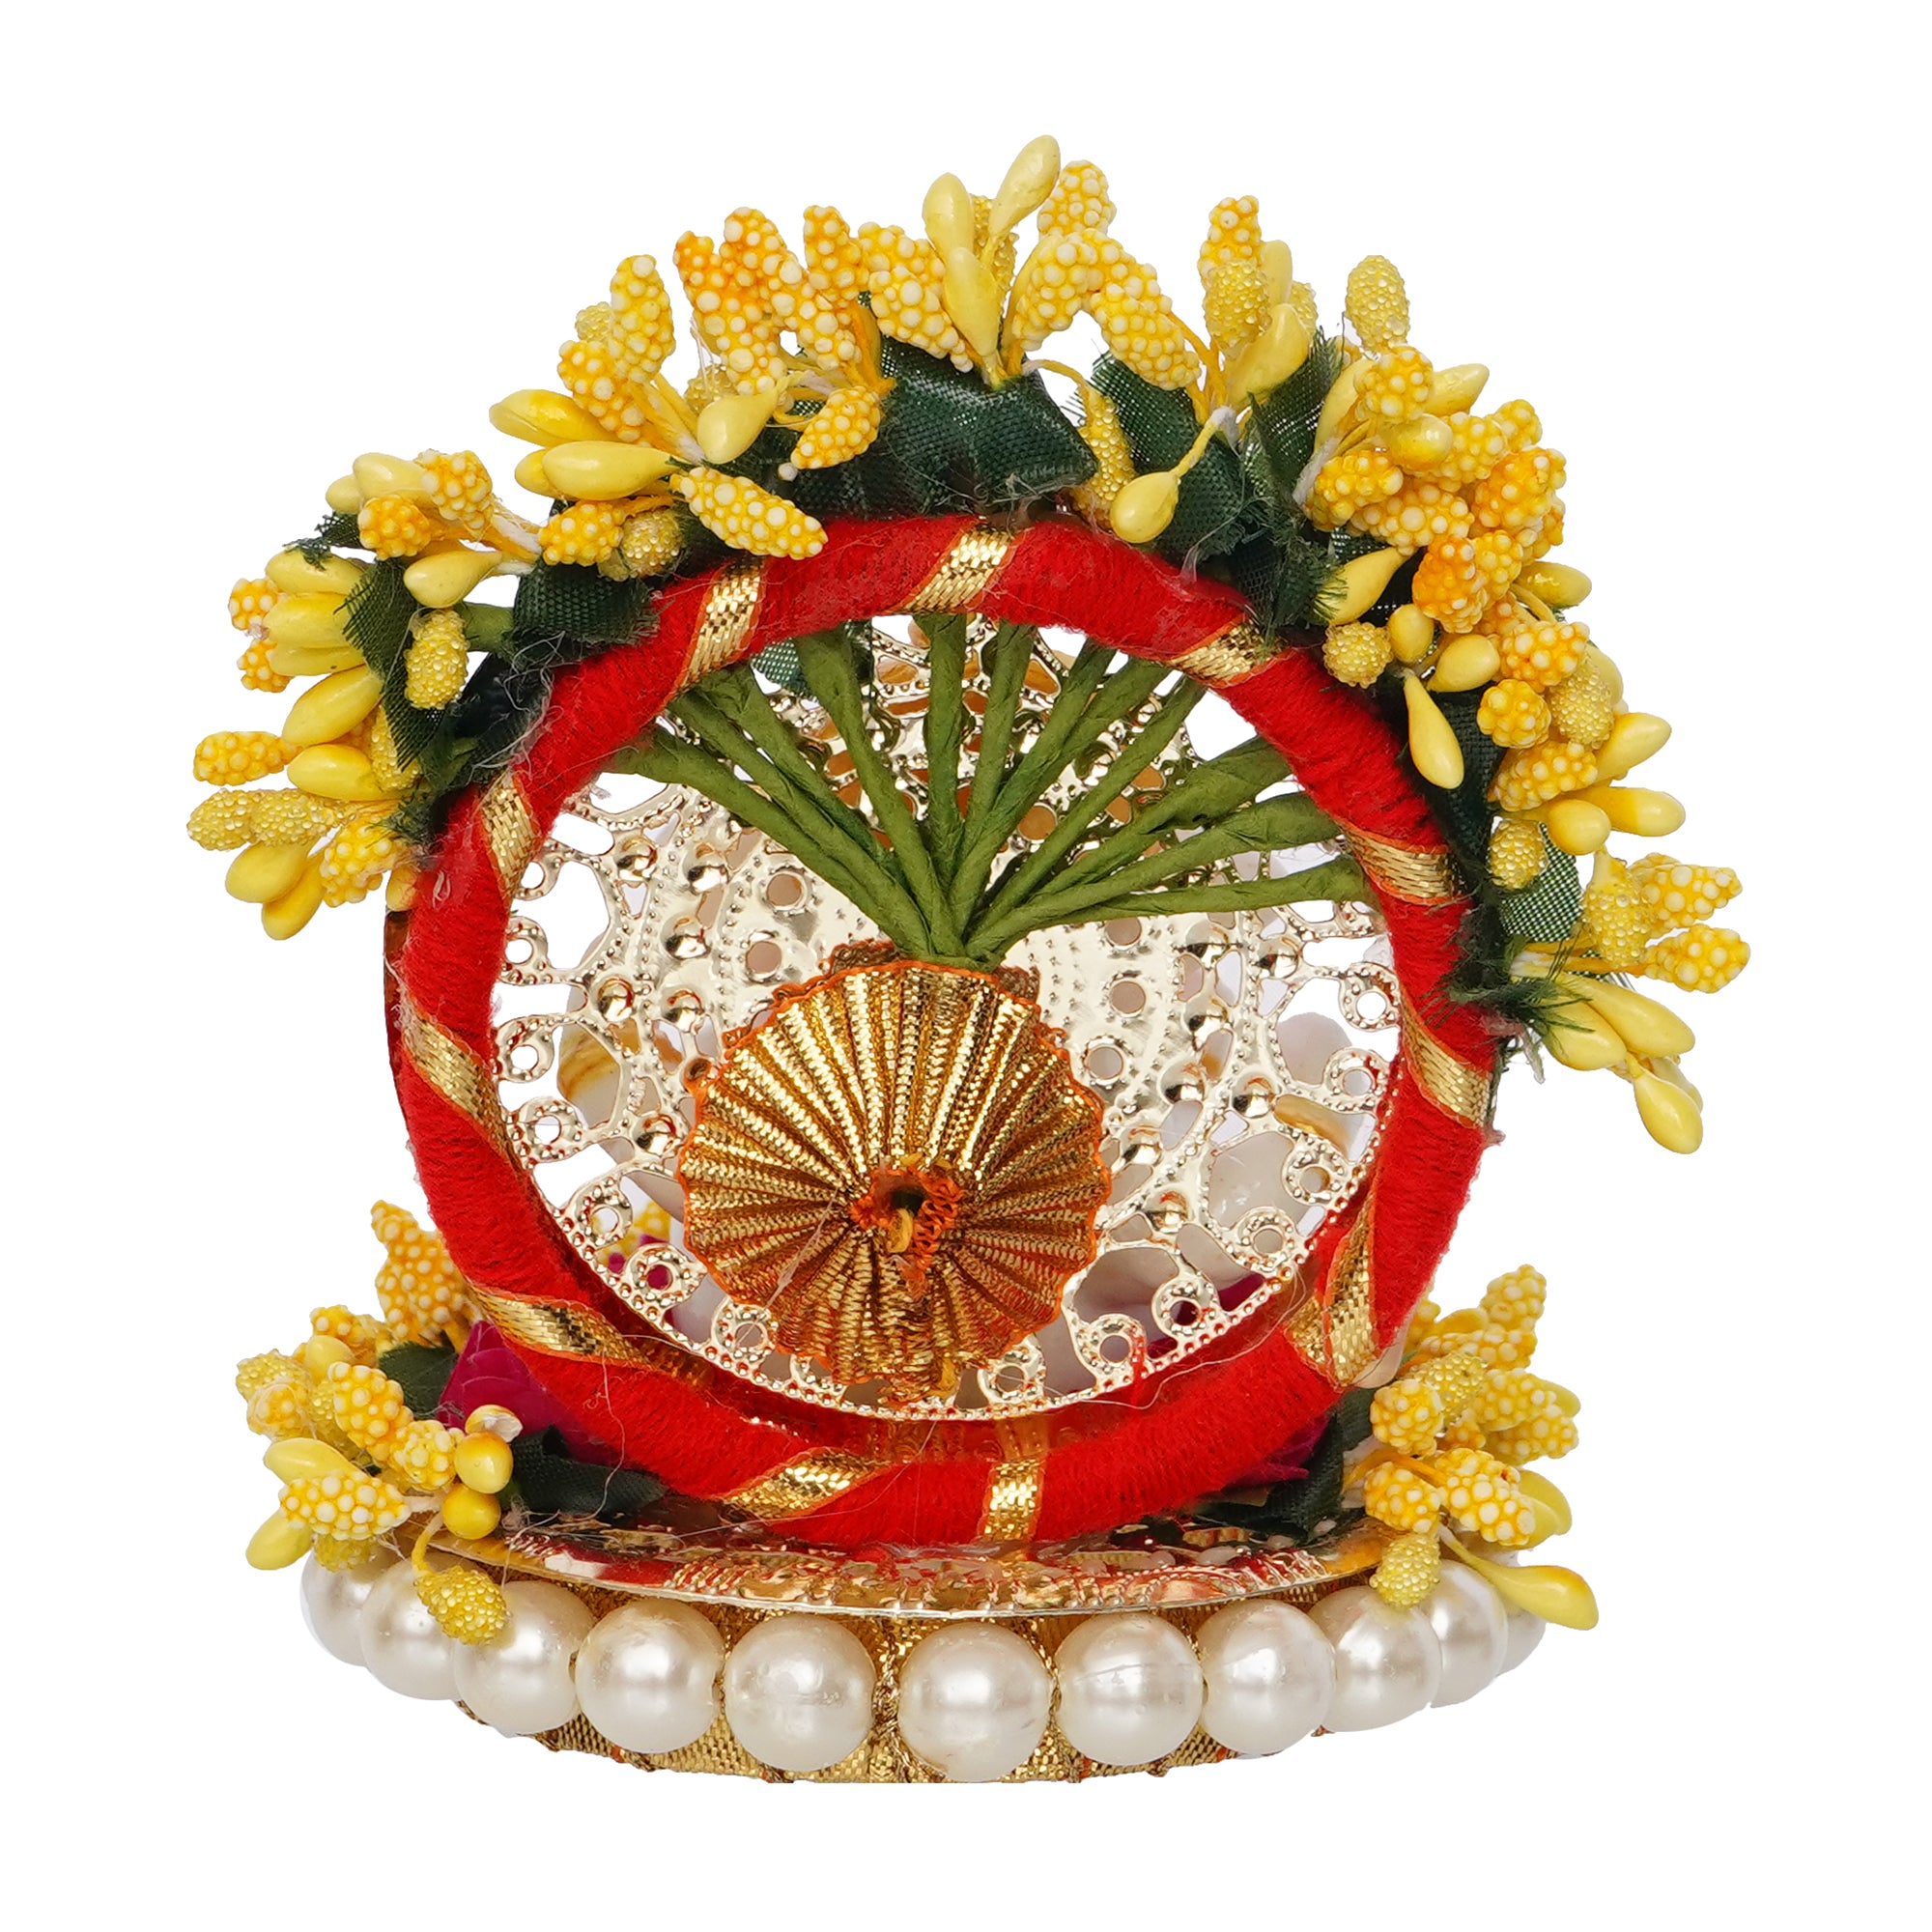 Polyresin Lord Ganesha Idol on Handcrafted Yellow Floral Plate for Home and Car Dashboard 6